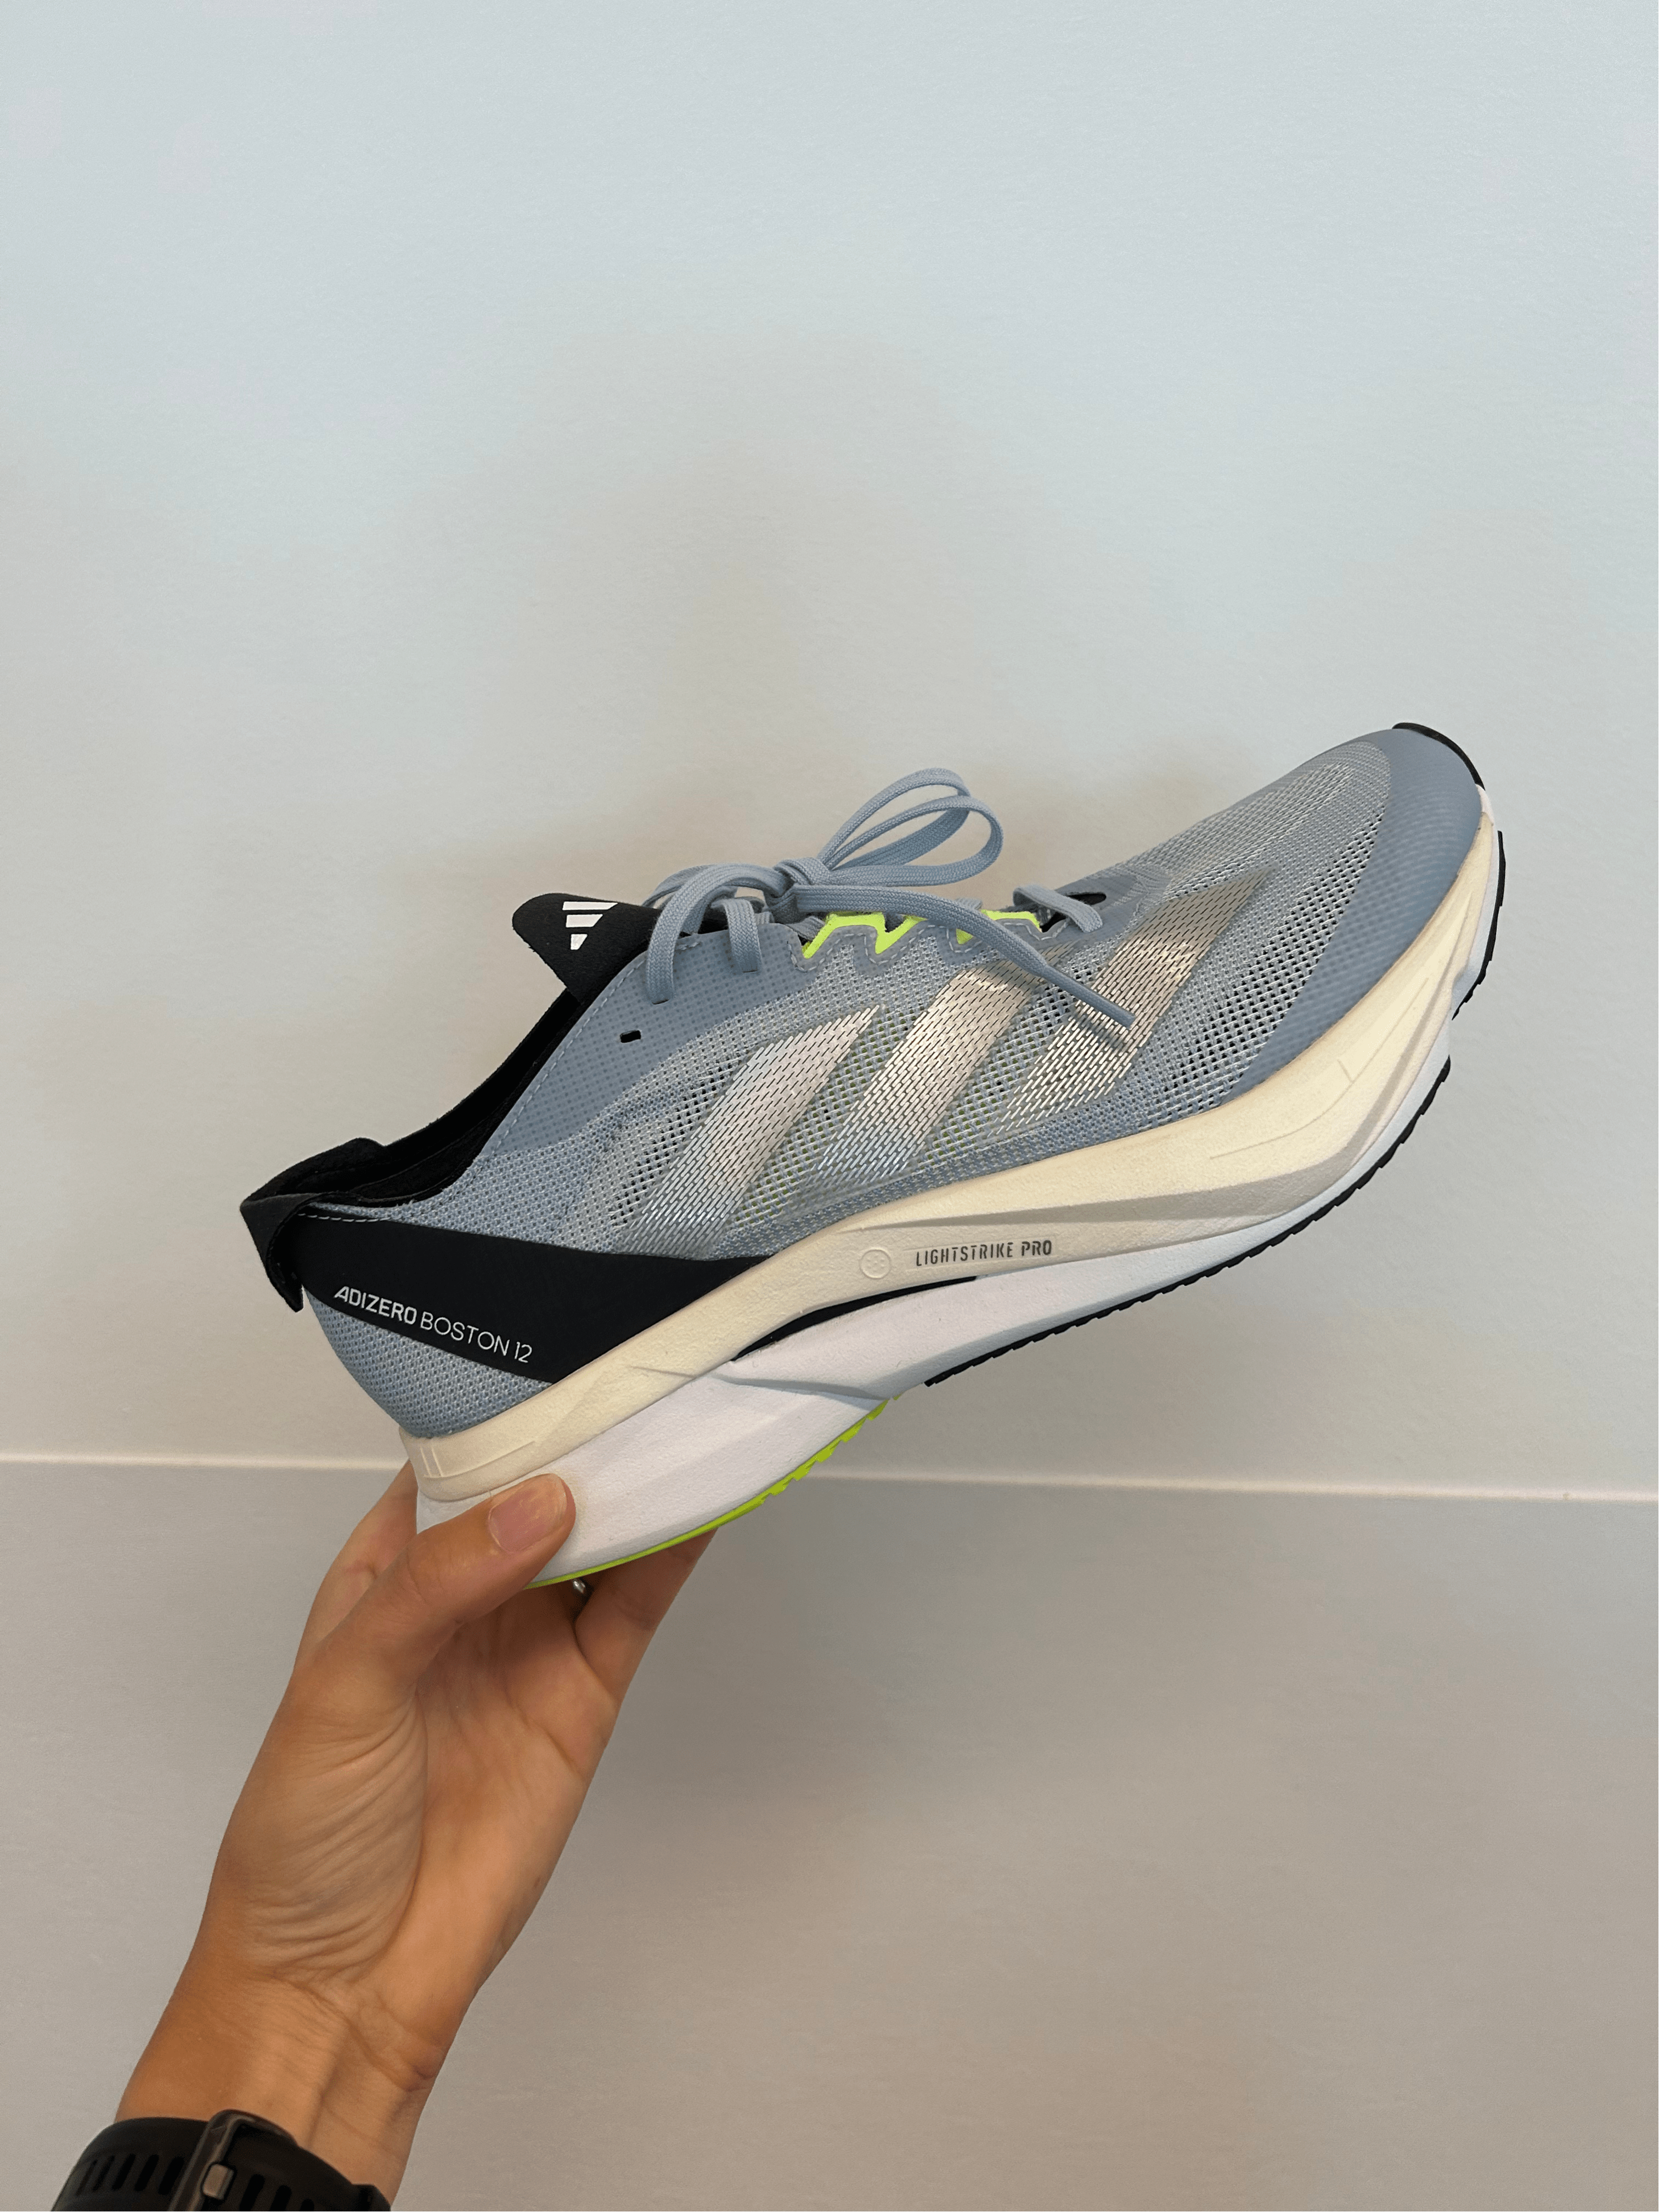 Adizero 12: Tried and tested